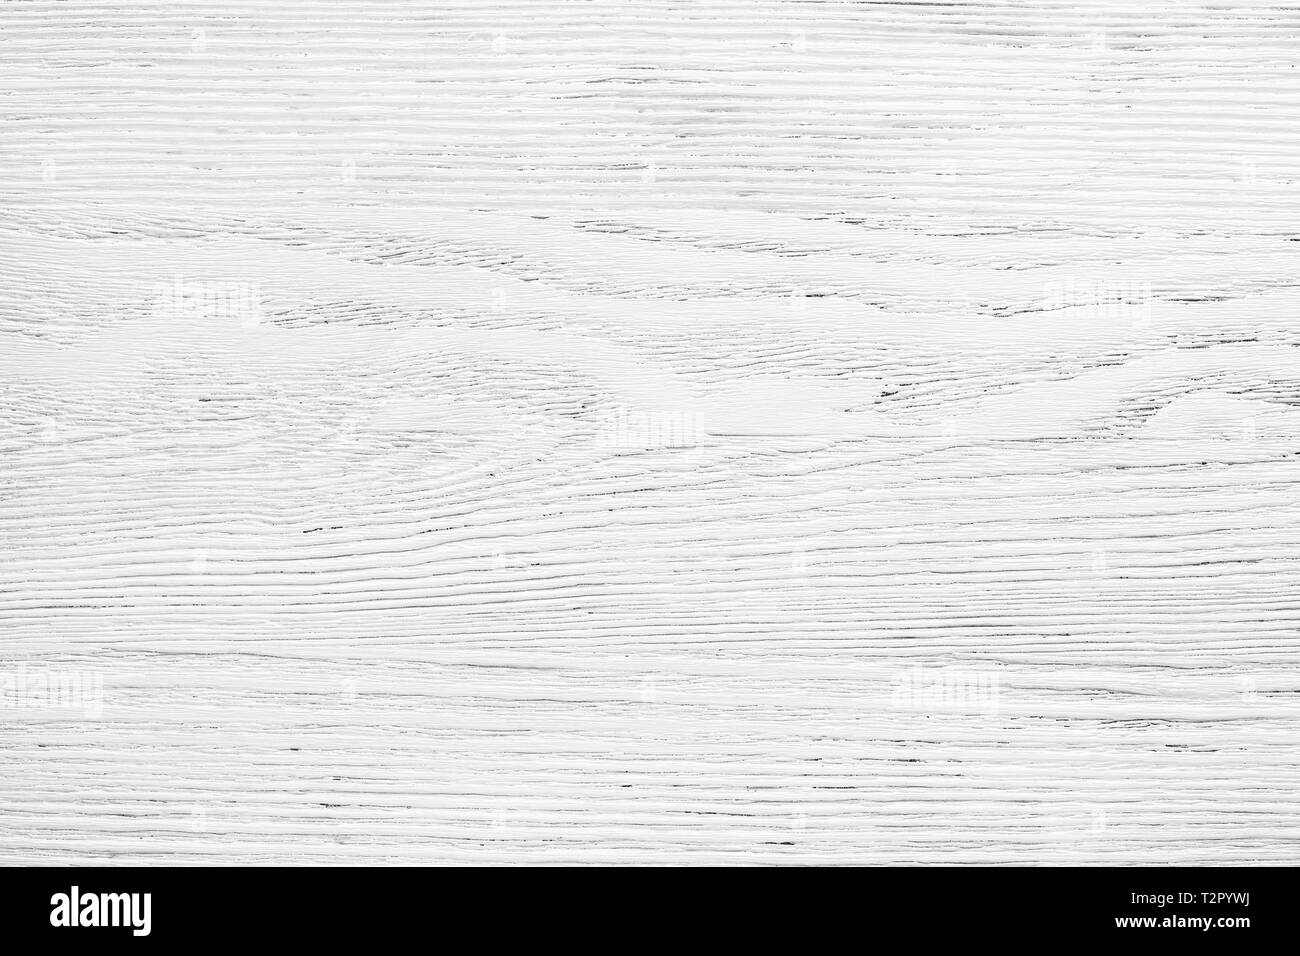 Old wooden board painted white.  Aged wood texture for background. Stock Photo